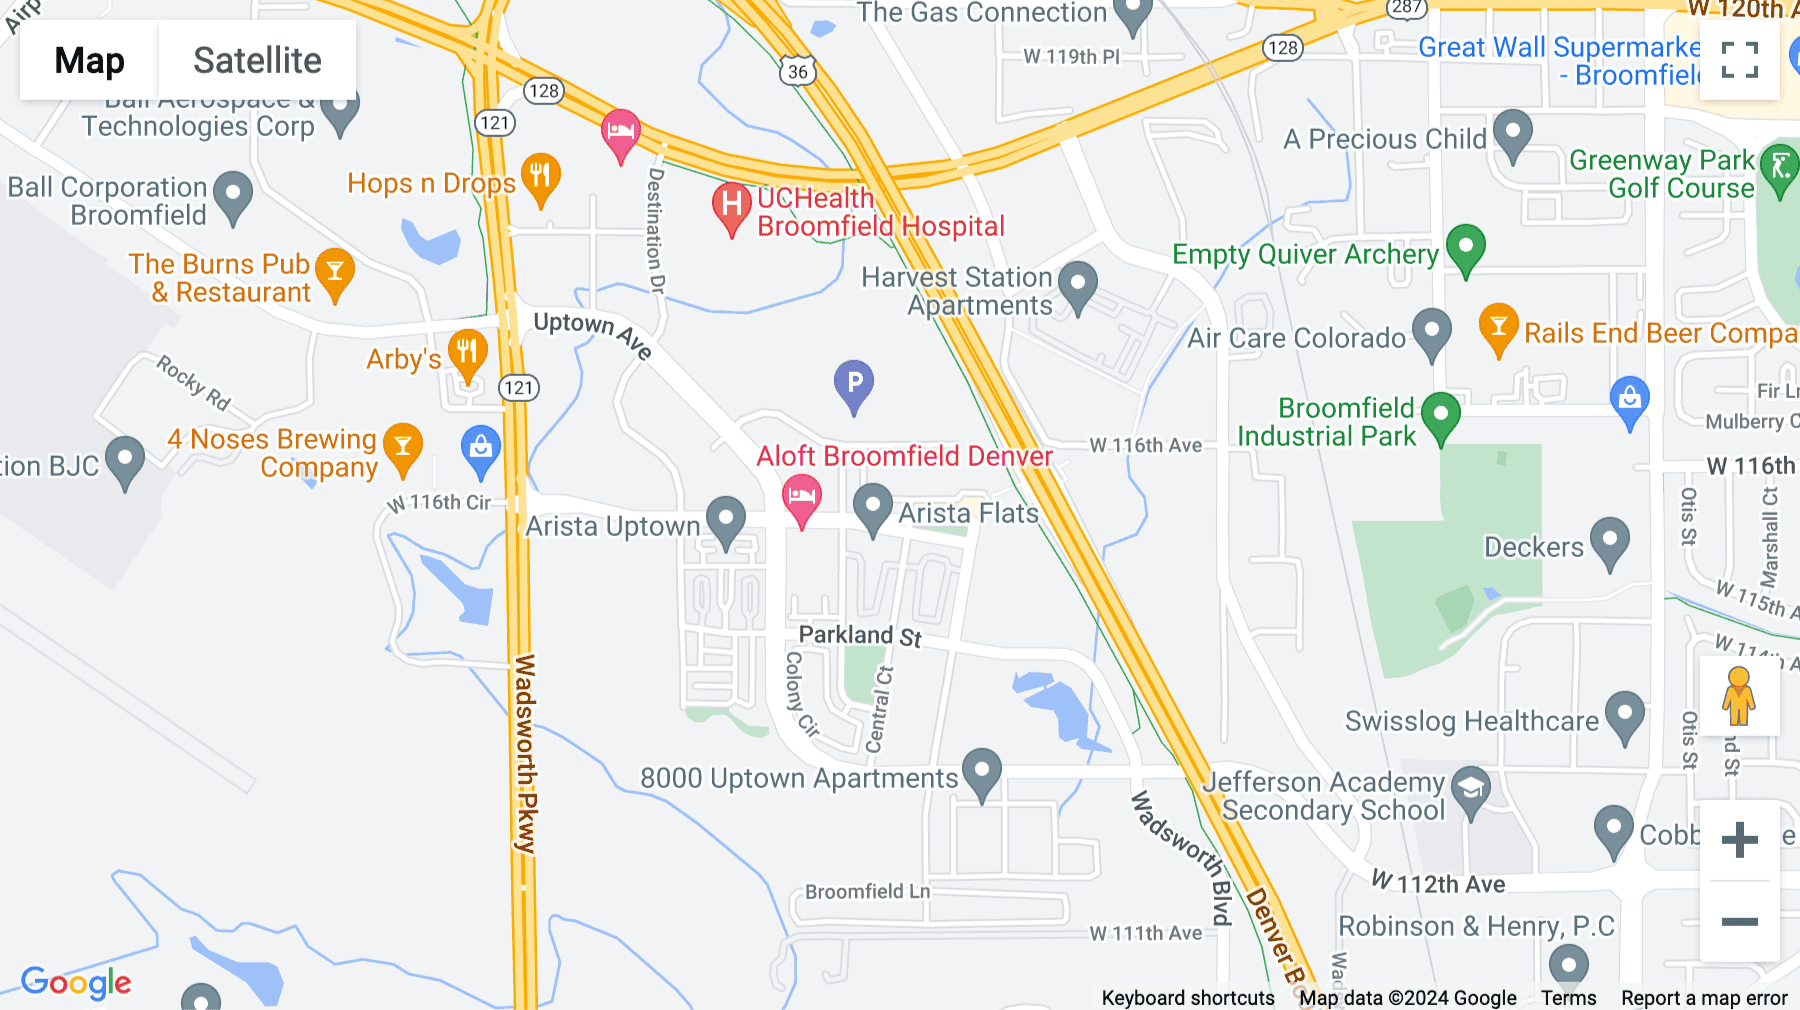 Click for interative map of 8181 Arista Place, Suites 100, 200 & 500, Broomfield